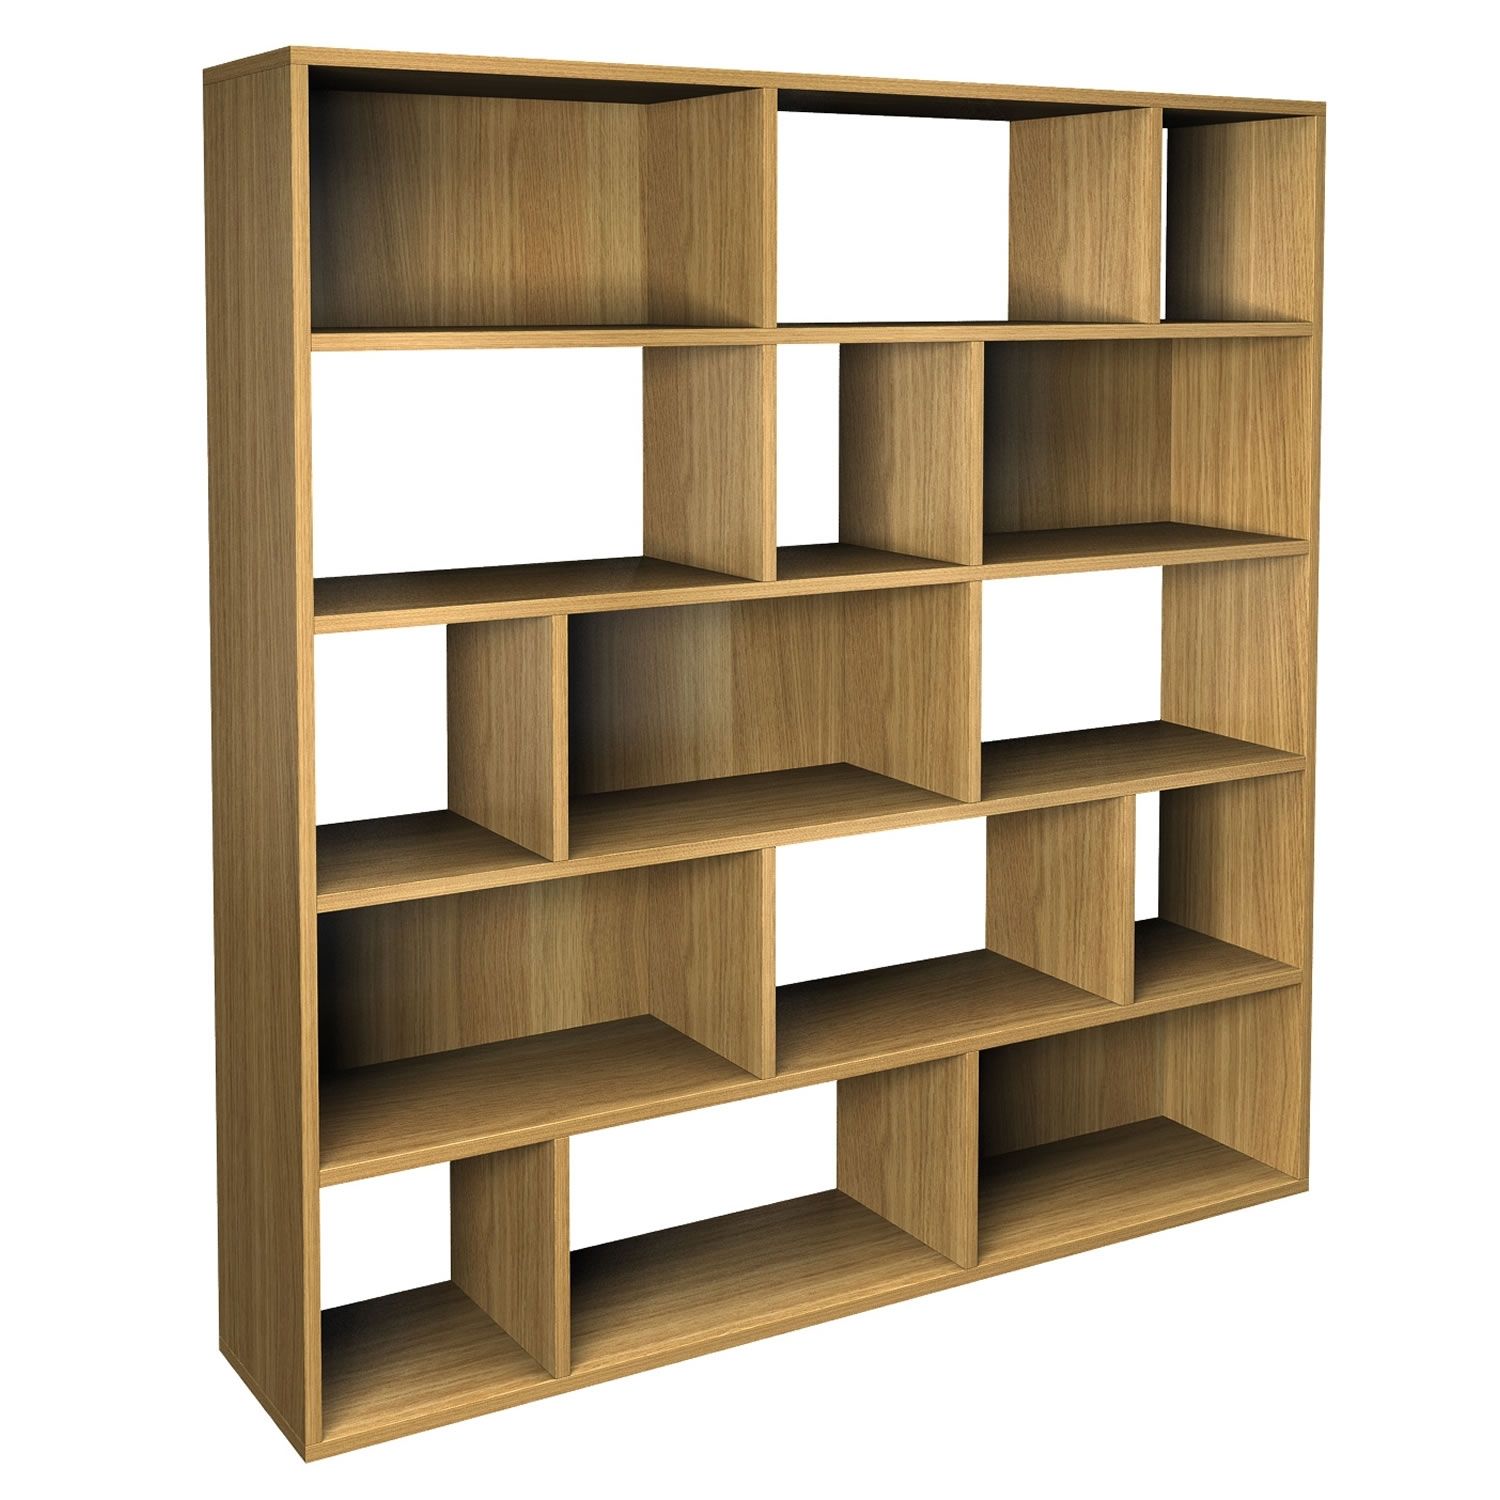 Furniture Simple Stylish Designs Pictures Of Creative Bookshelf Throughout Contemporary Oak Shelving Units (View 9 of 15)